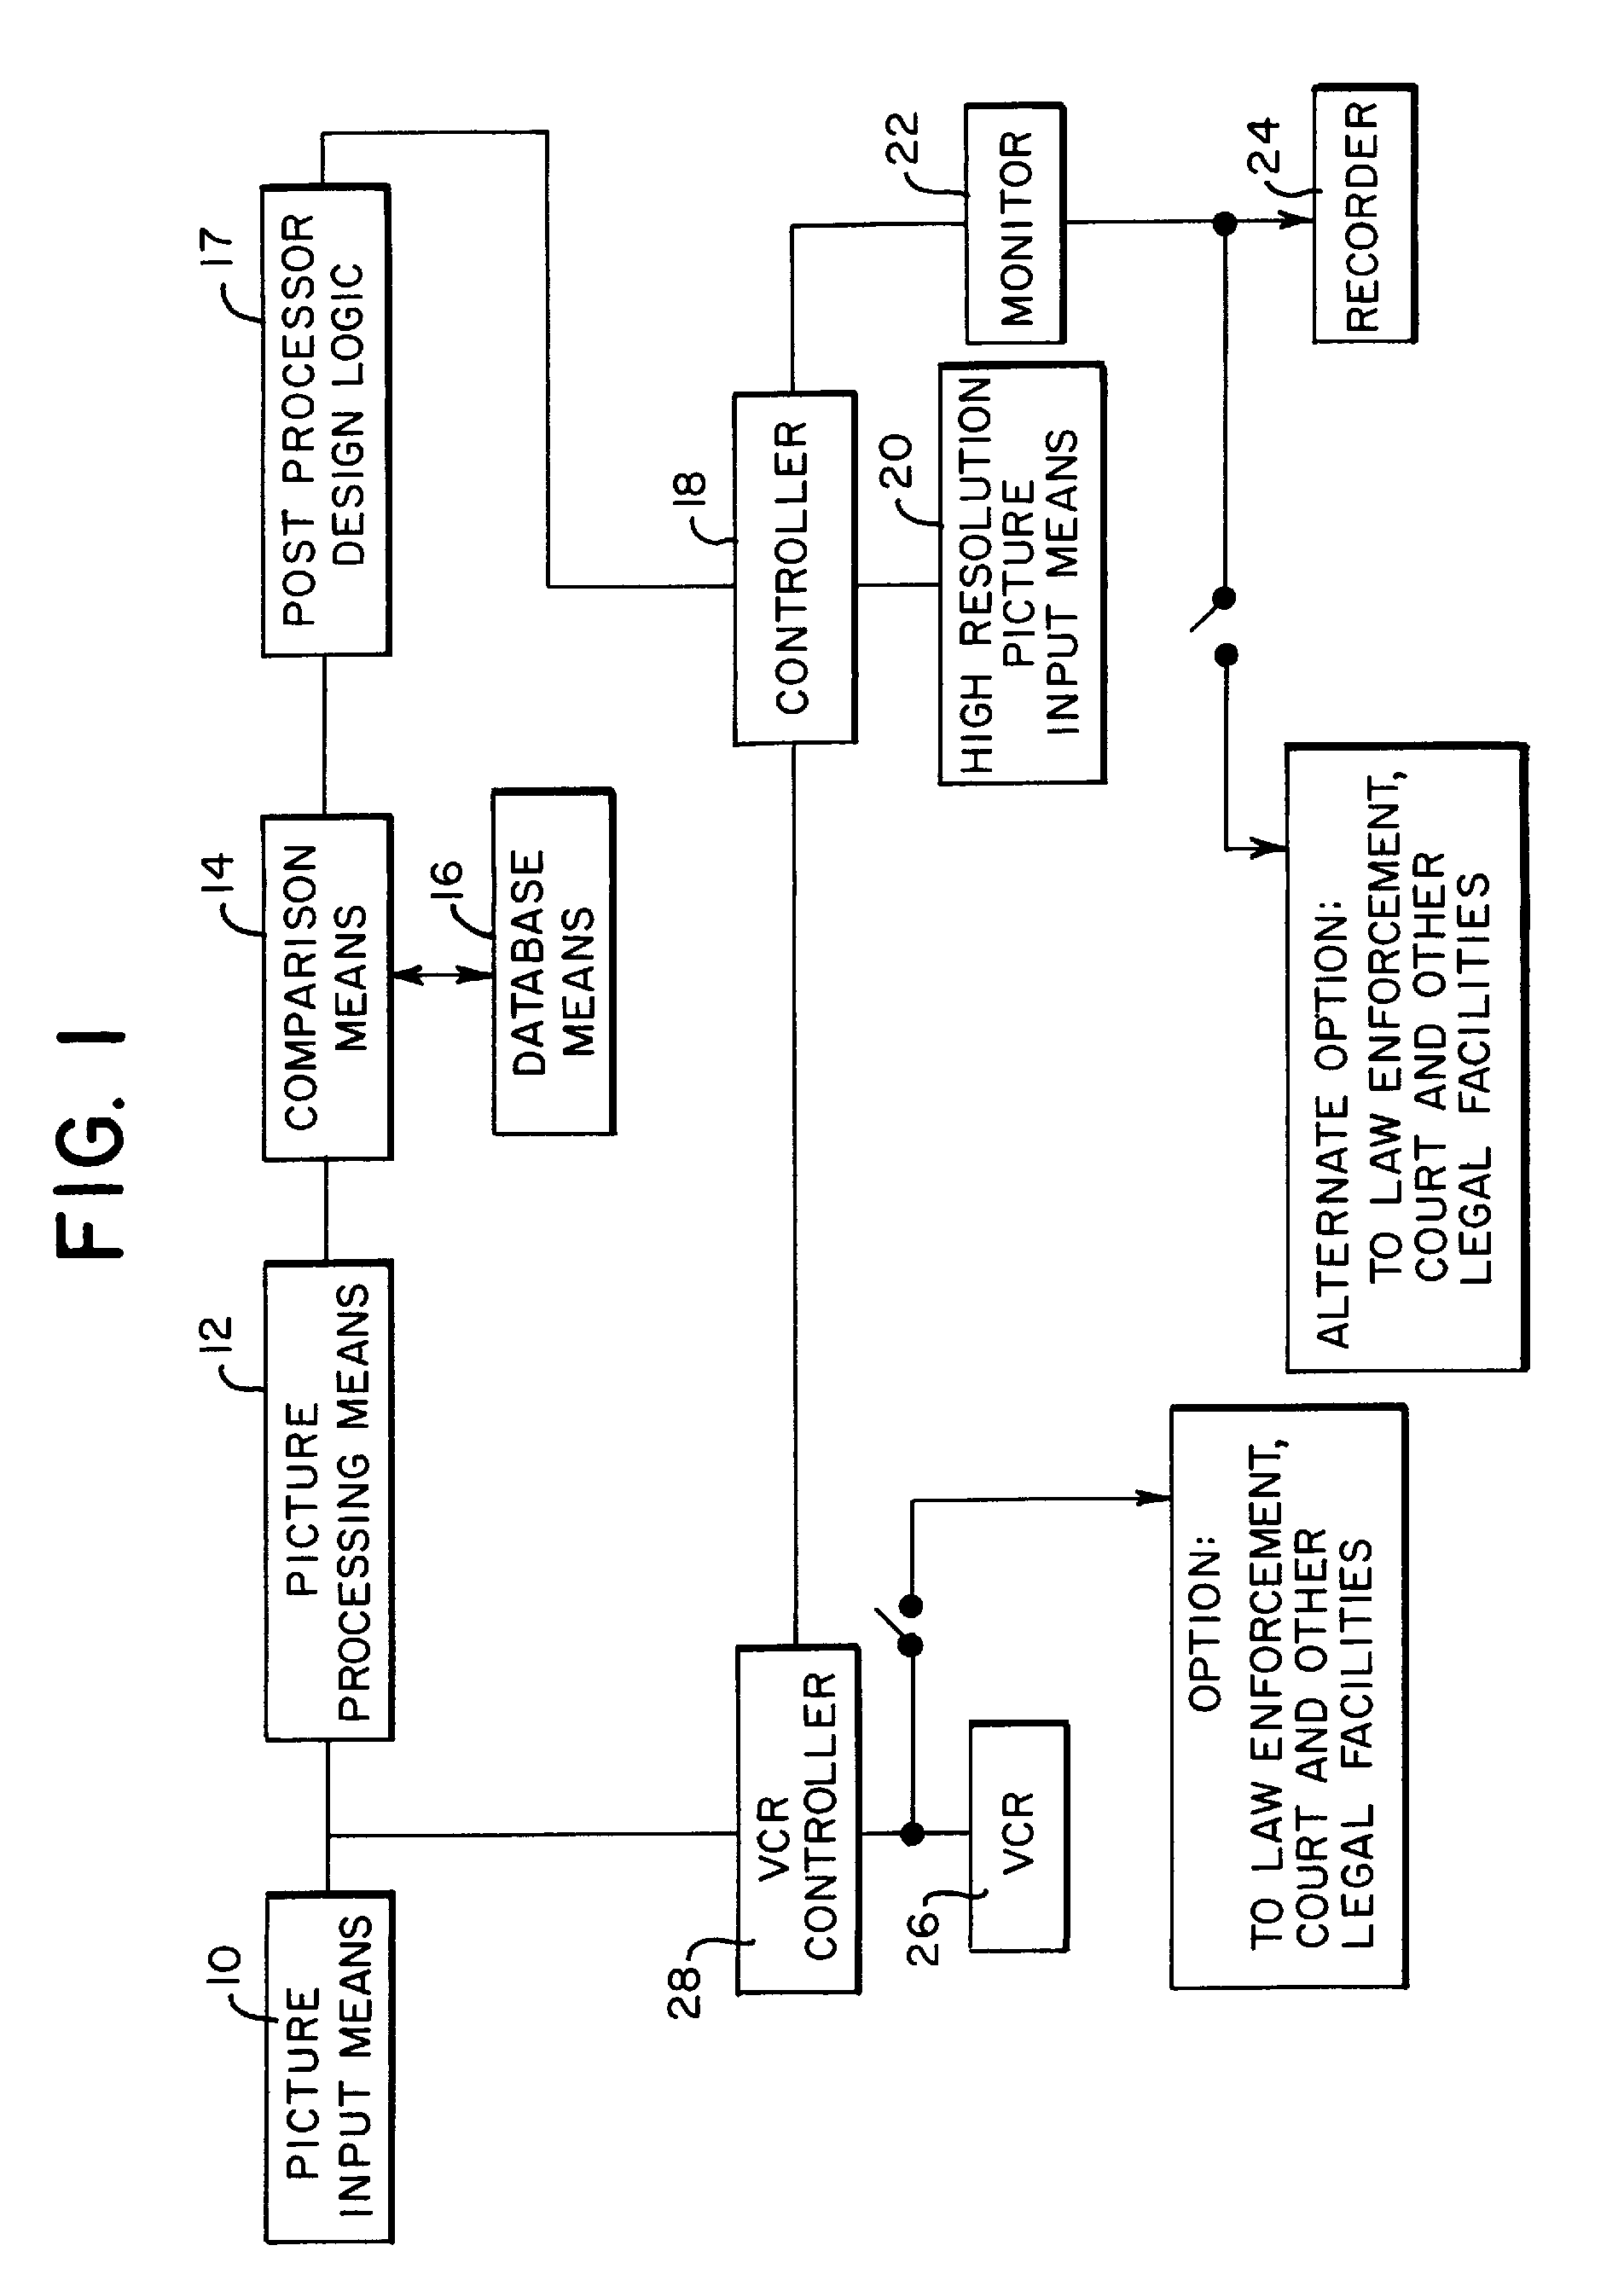 Abnormality detection and surveillance system